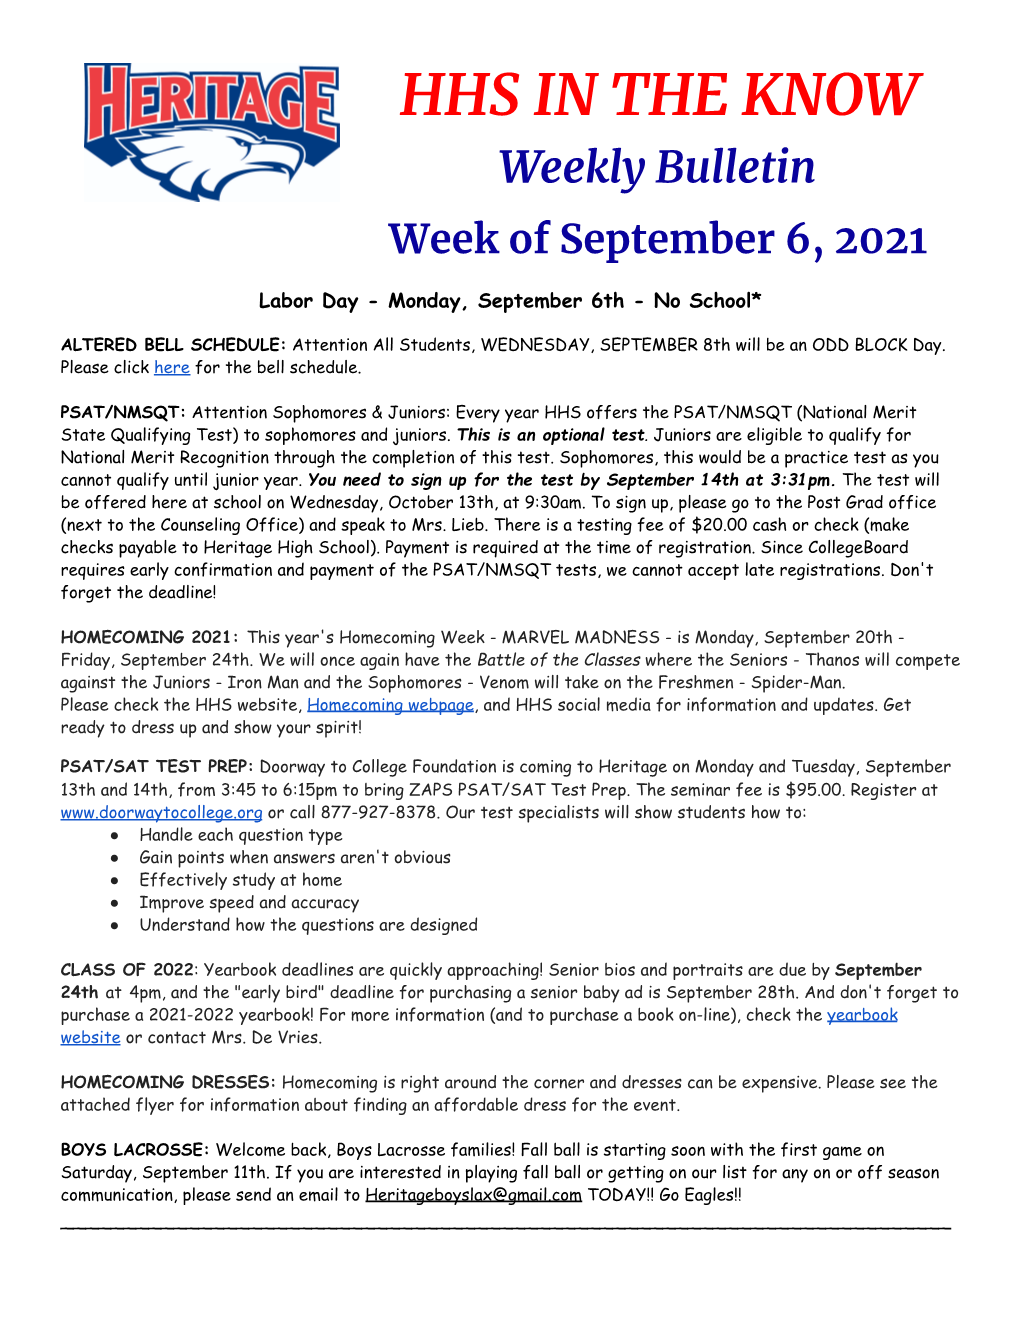 HHS in the KNOW Weekly Bulletin Week of September 6, 2021